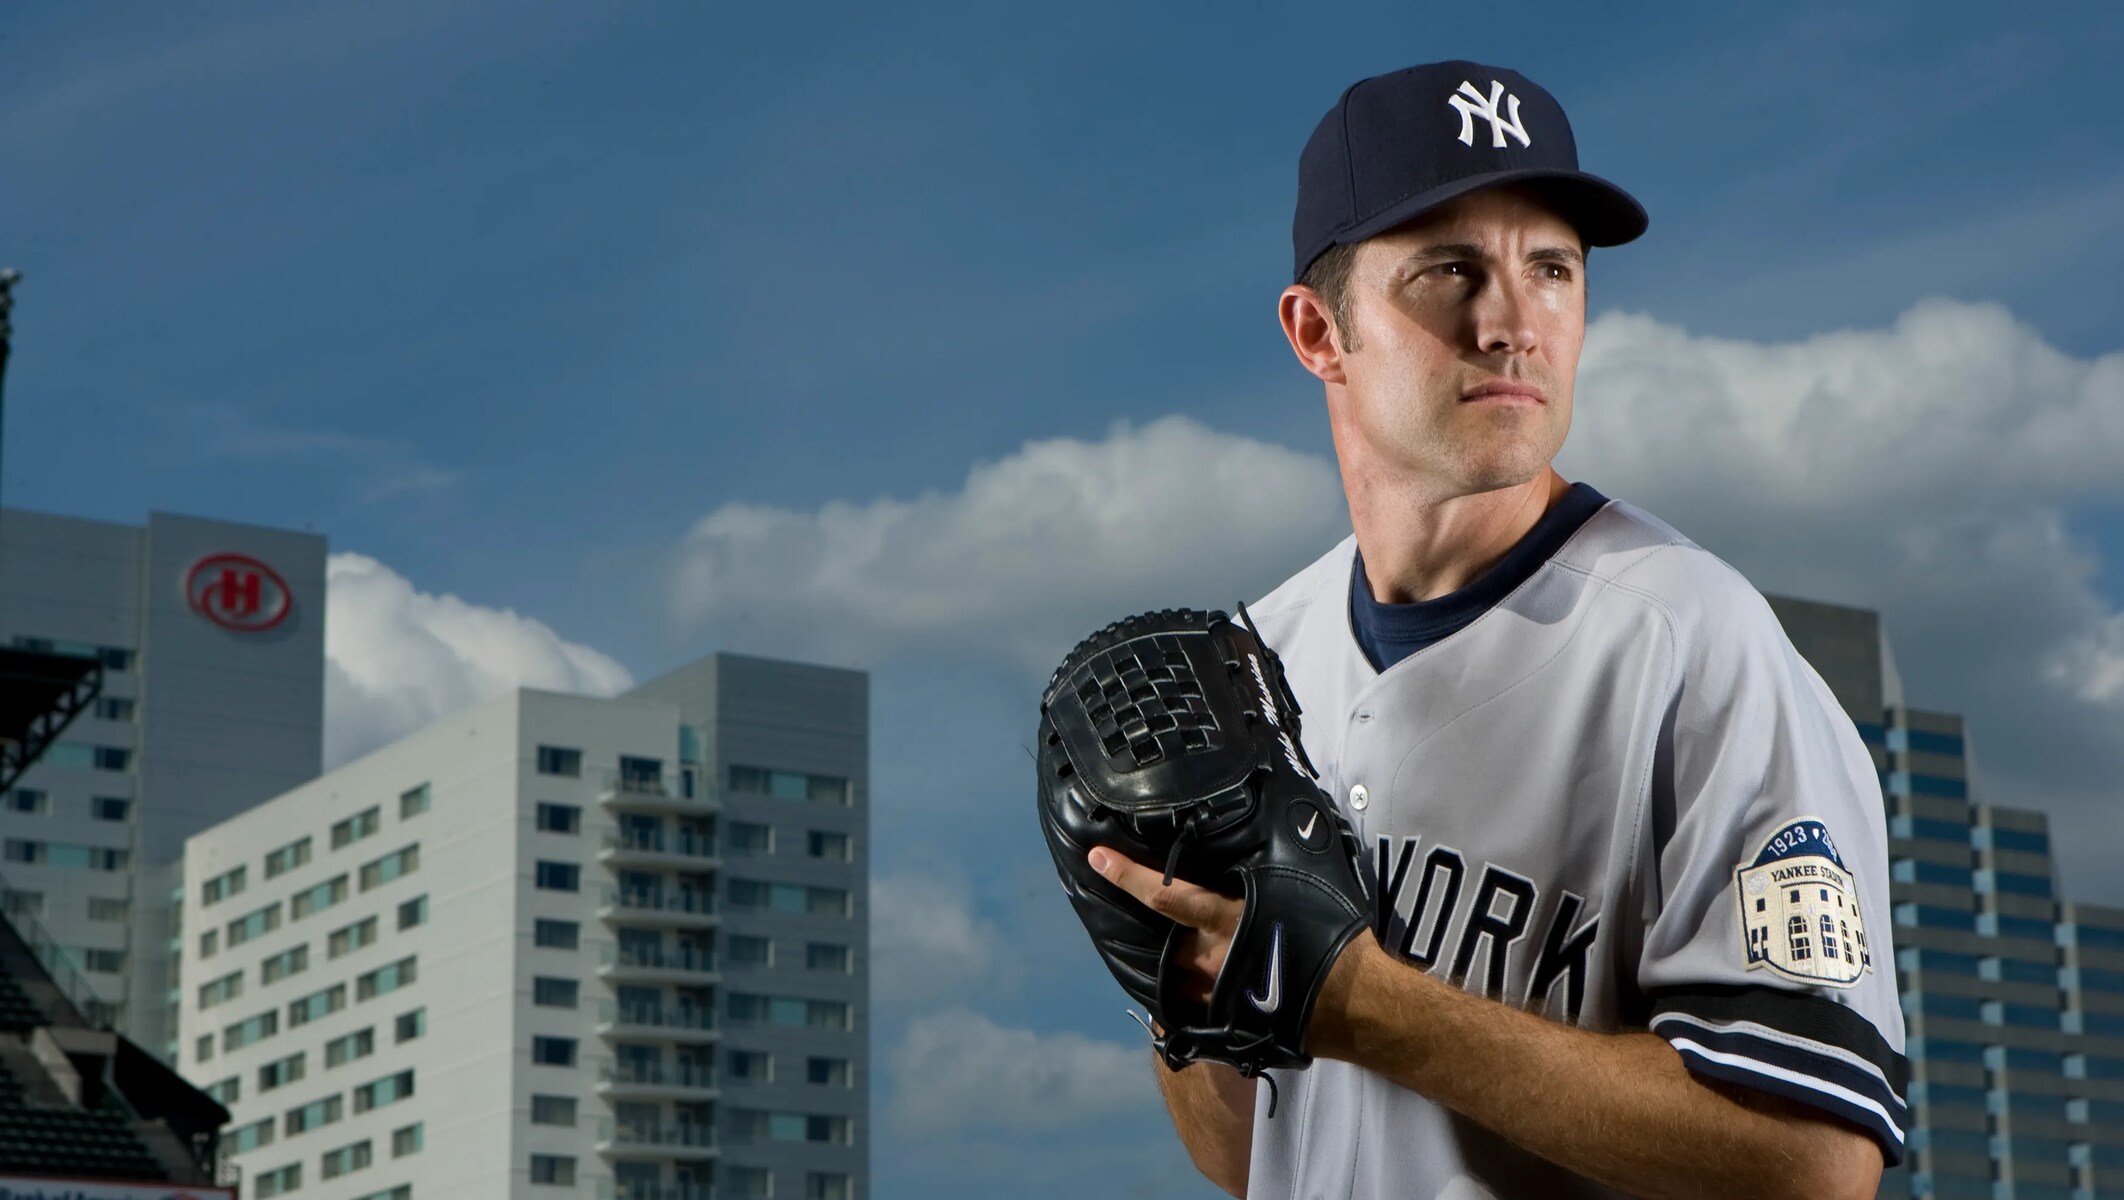 New York Yankees news: Mike Mussina makes Hall of Fame cap selection